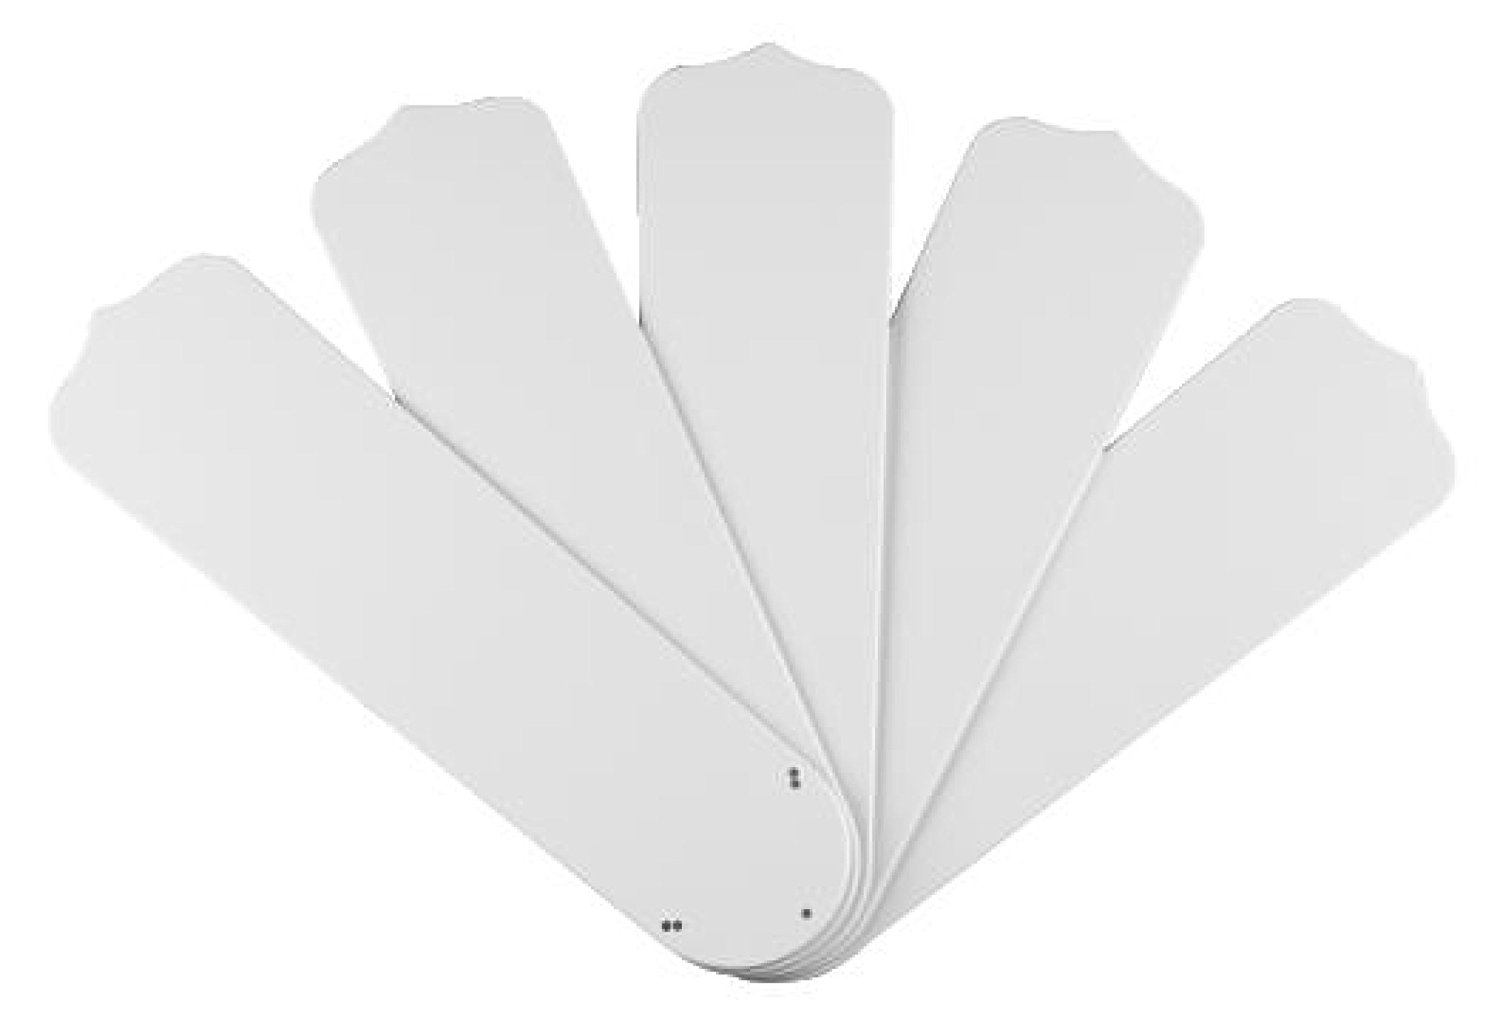 Wellington 7741400 52-Inch White Outdoor Replacement Fan Blades, Five-Pack